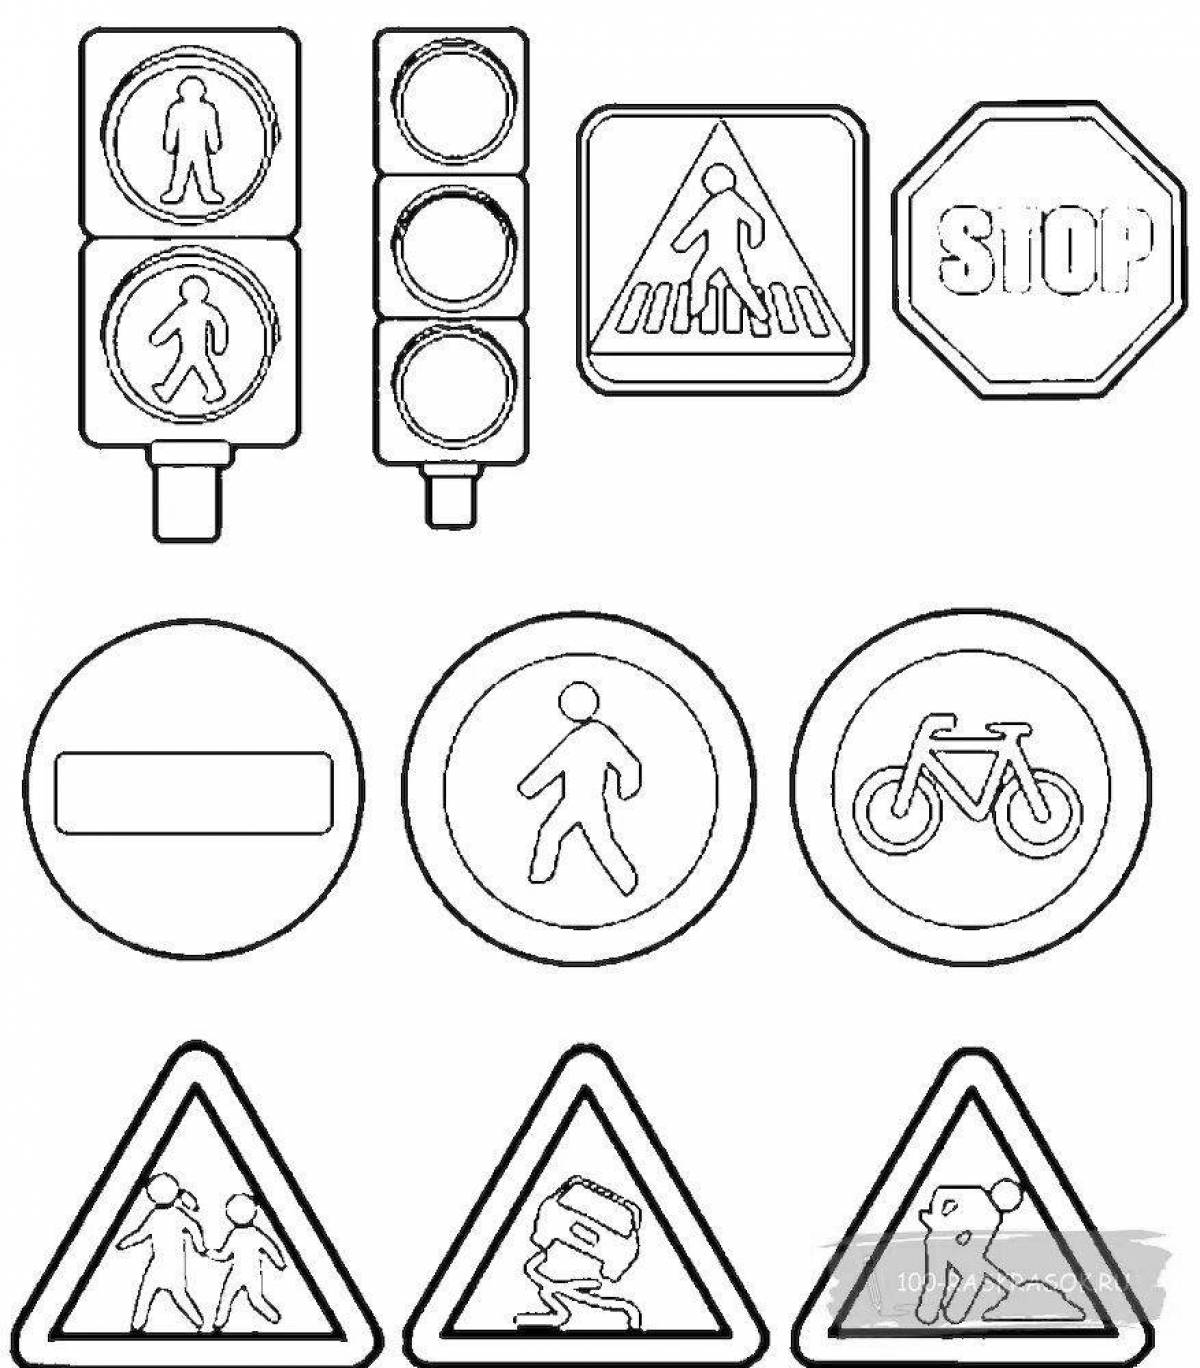 A fun coloring book for elementary school traffic signs